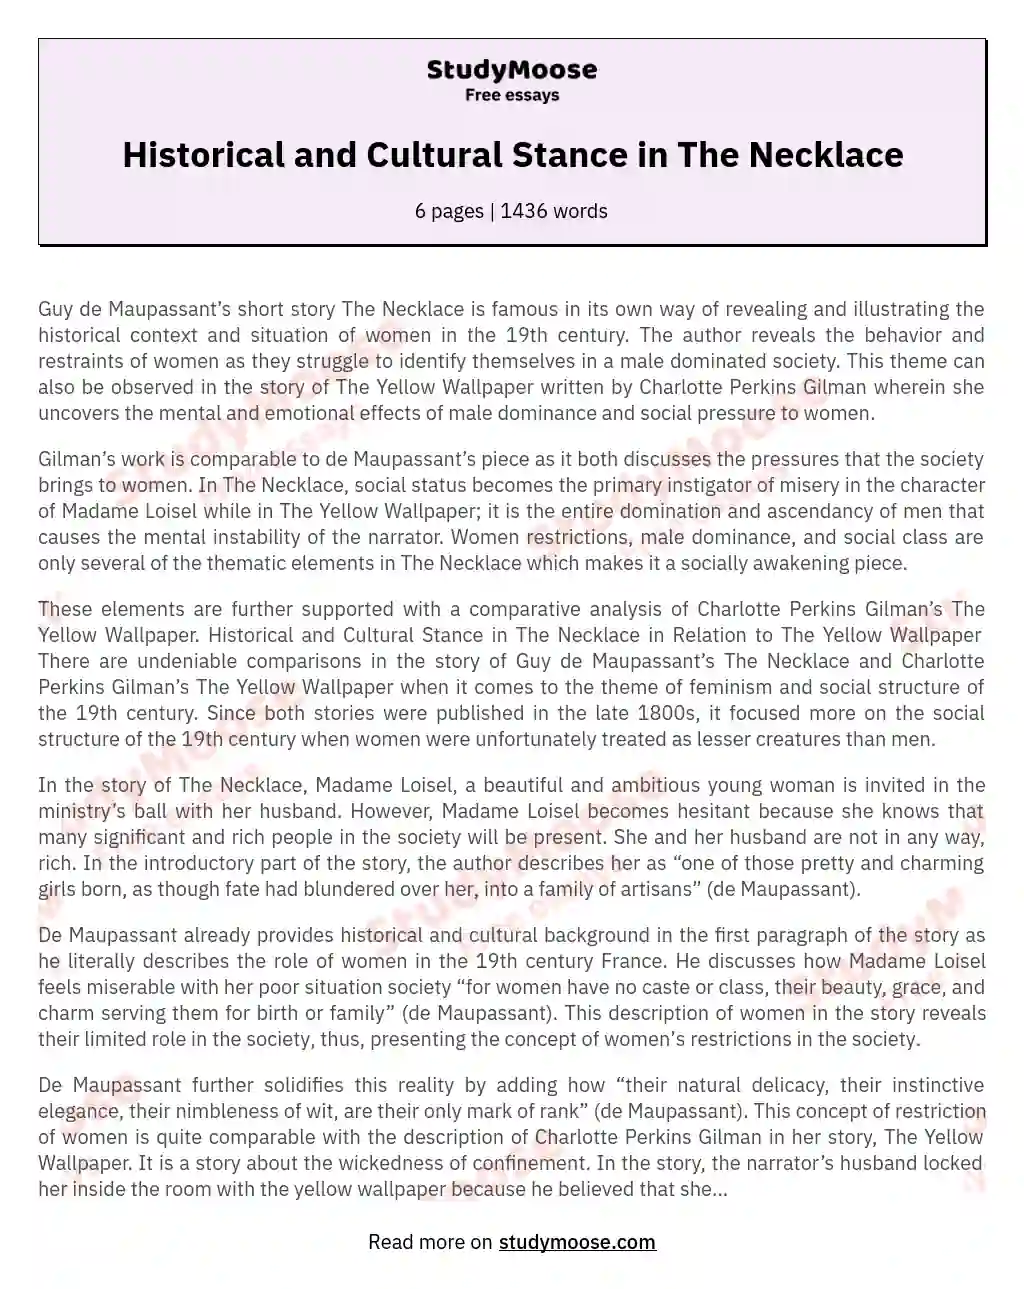 Historical and Cultural Stance in The Necklace